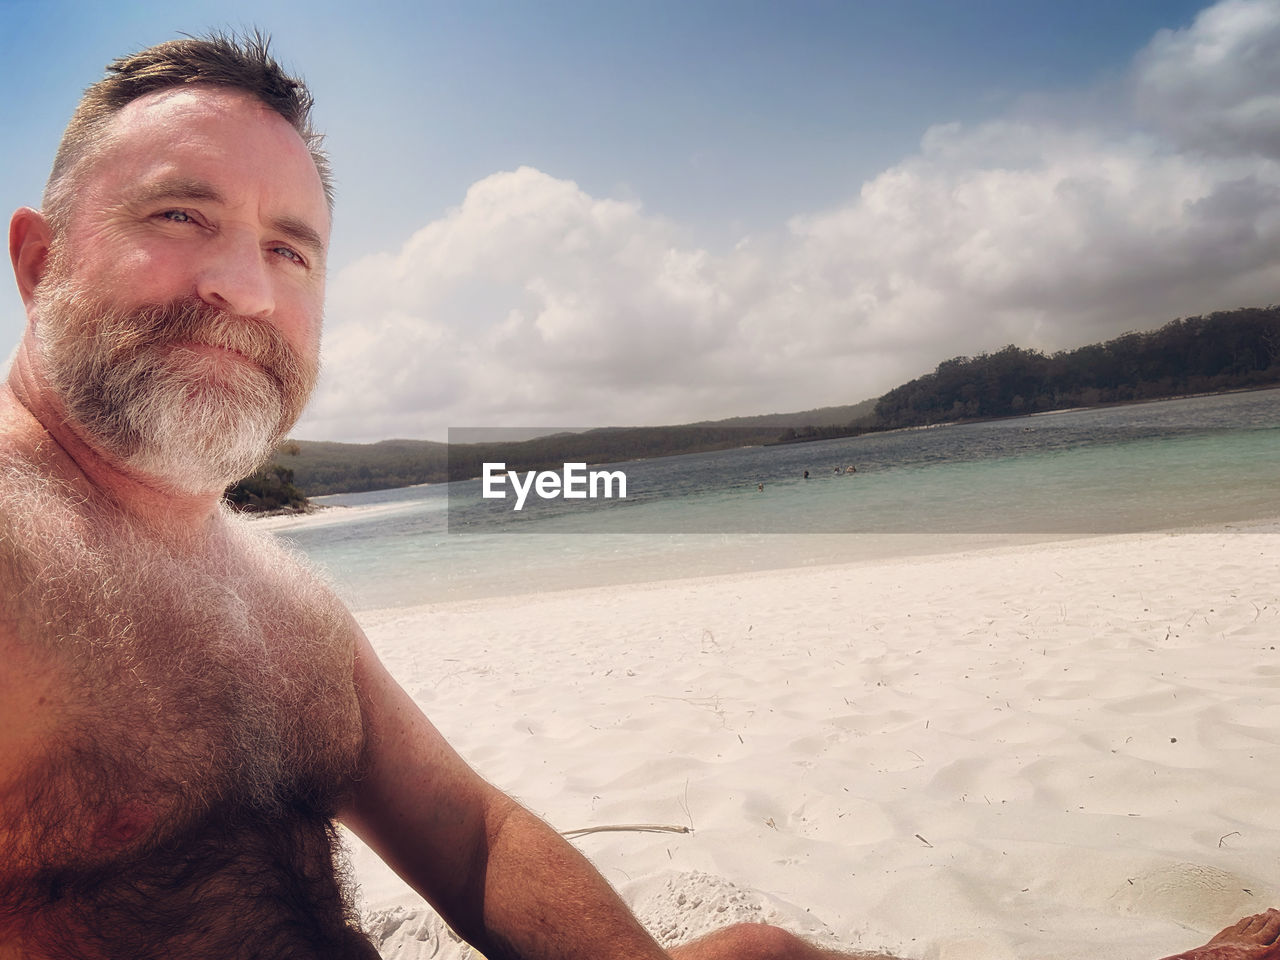 beach, land, water, sea, sky, adult, one person, men, holiday, sand, trip, vacation, nature, portrait, beard, facial hair, smiling, cloud, relaxation, happiness, looking at camera, mature adult, leisure activity, emotion, summer, travel, ocean, person, day, travel destinations, beauty in nature, sunlight, lifestyles, cheerful, outdoors, human face, shore, enjoyment, scenics - nature